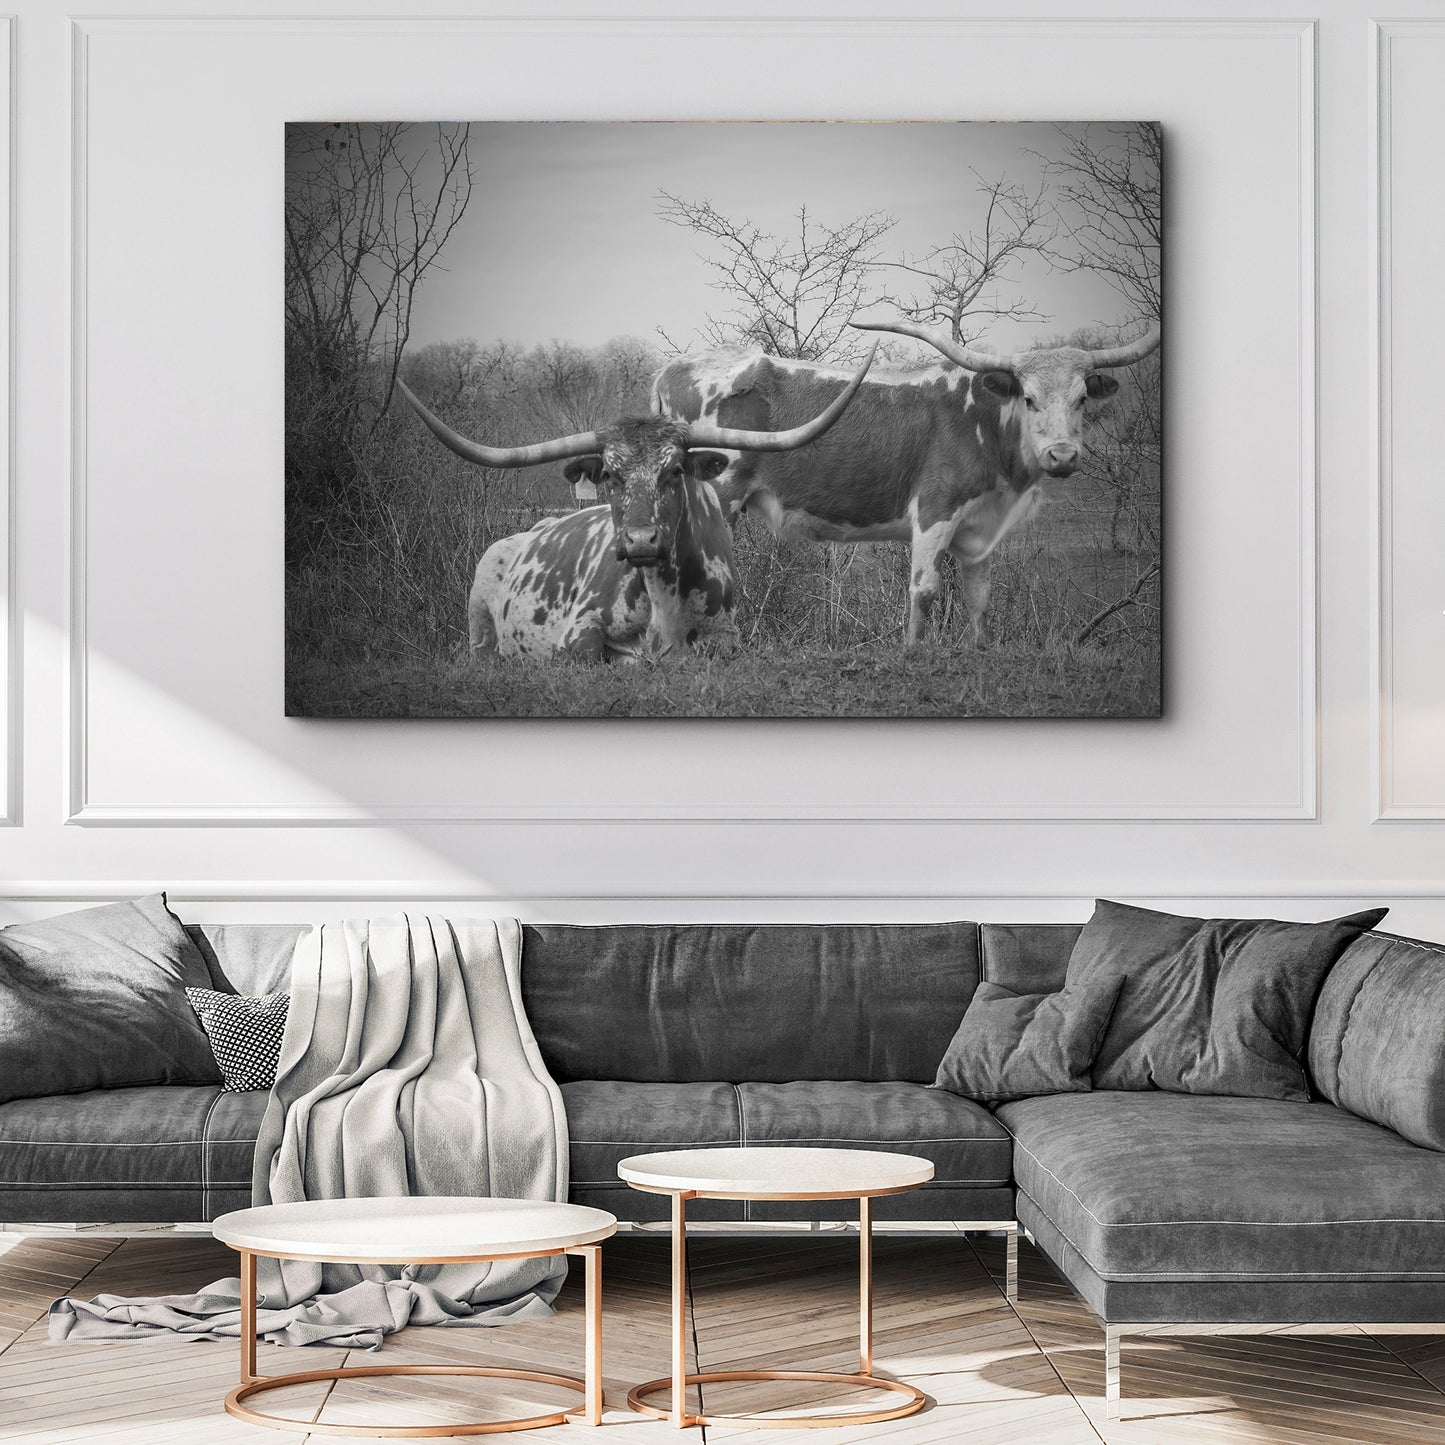 Monochrome Texas Longhorn Cattle Canvas Wall Art Style 2 - Image by Tailored Canvases